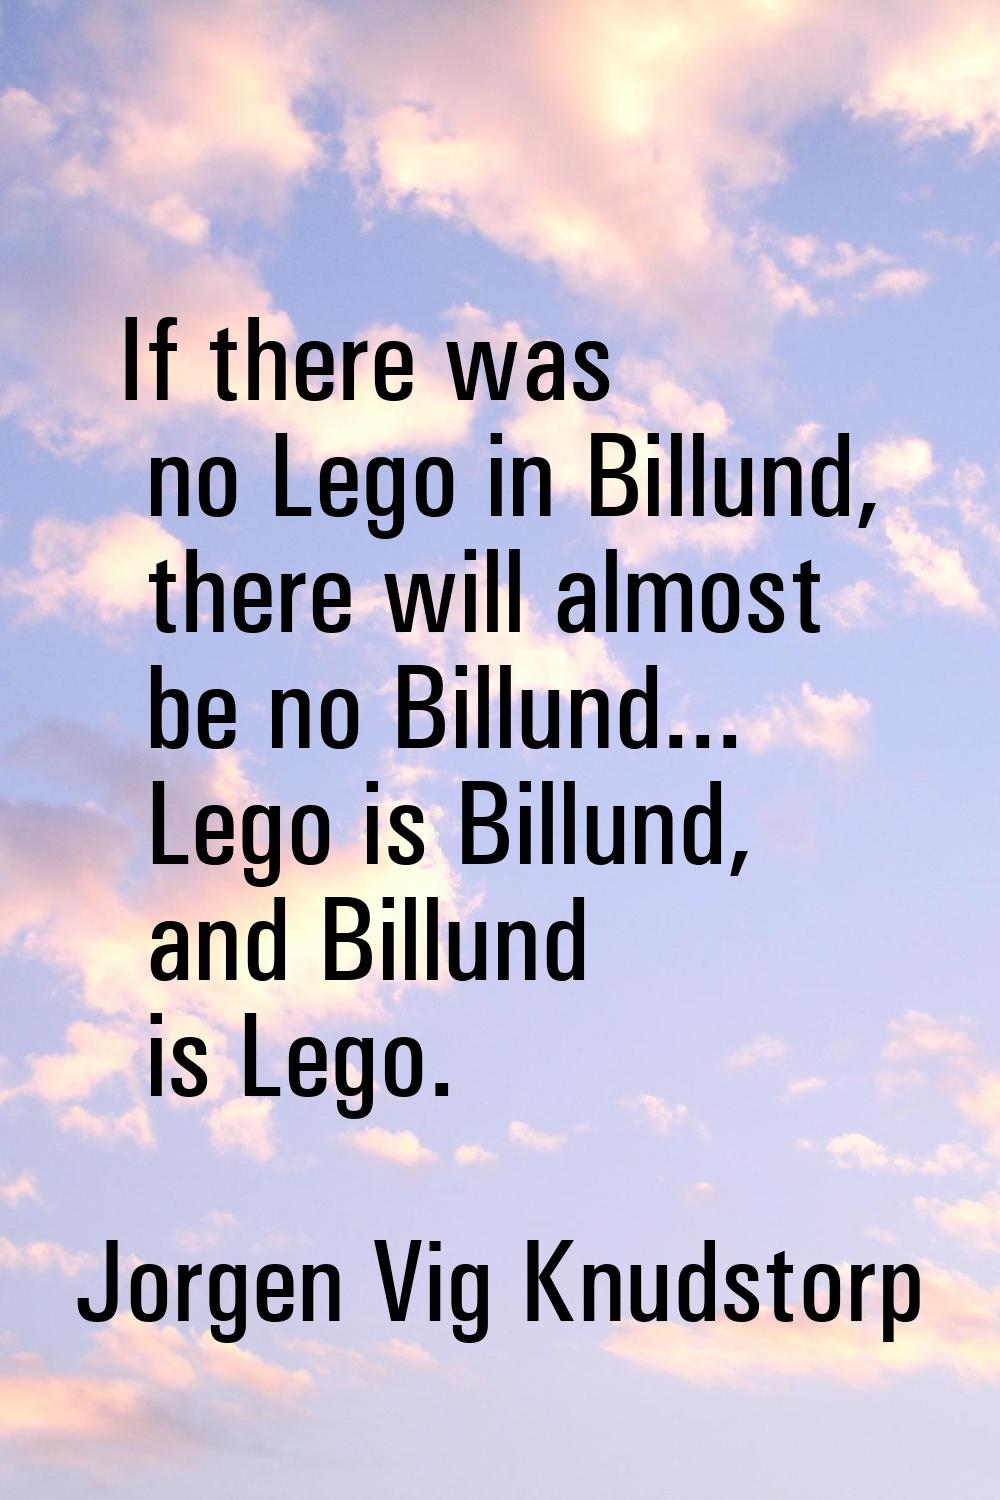 If there was no Lego in Billund, there will almost be no Billund... Lego is Billund, and Billund is